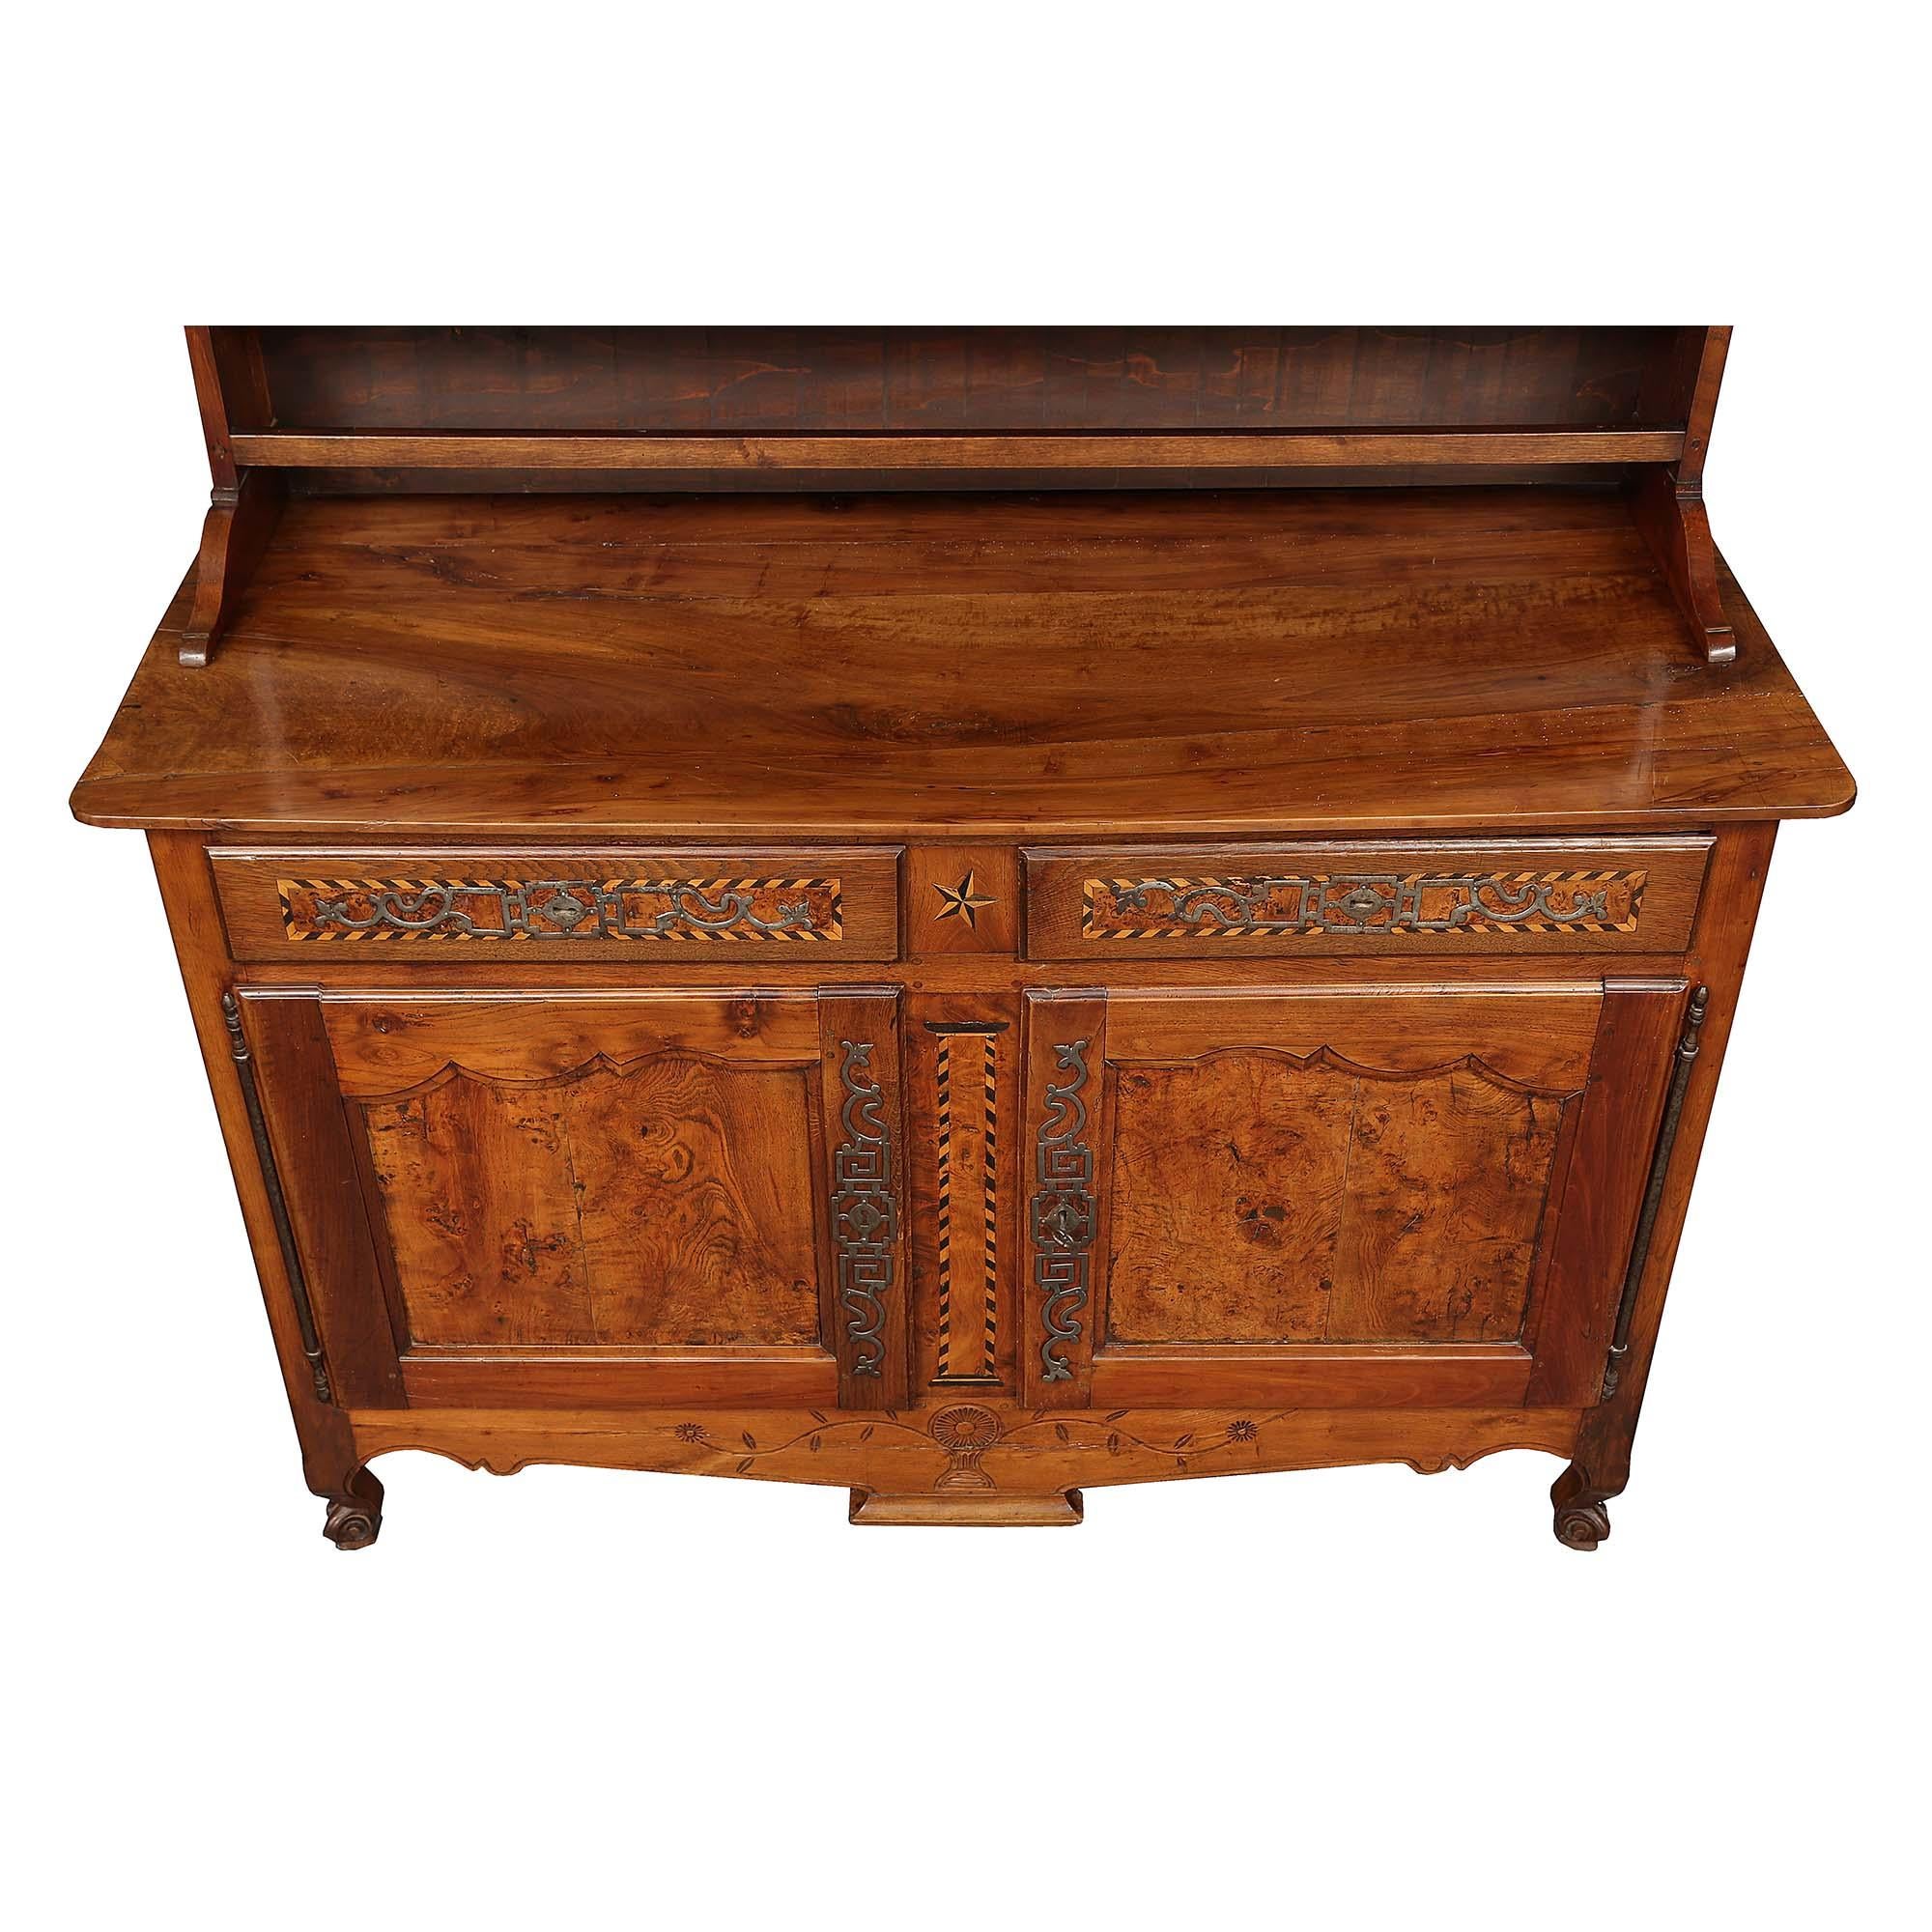 French 18th Century ‘Vaissellier’ in Walnut, Lemon Wood and Burl Walnut For Sale 2